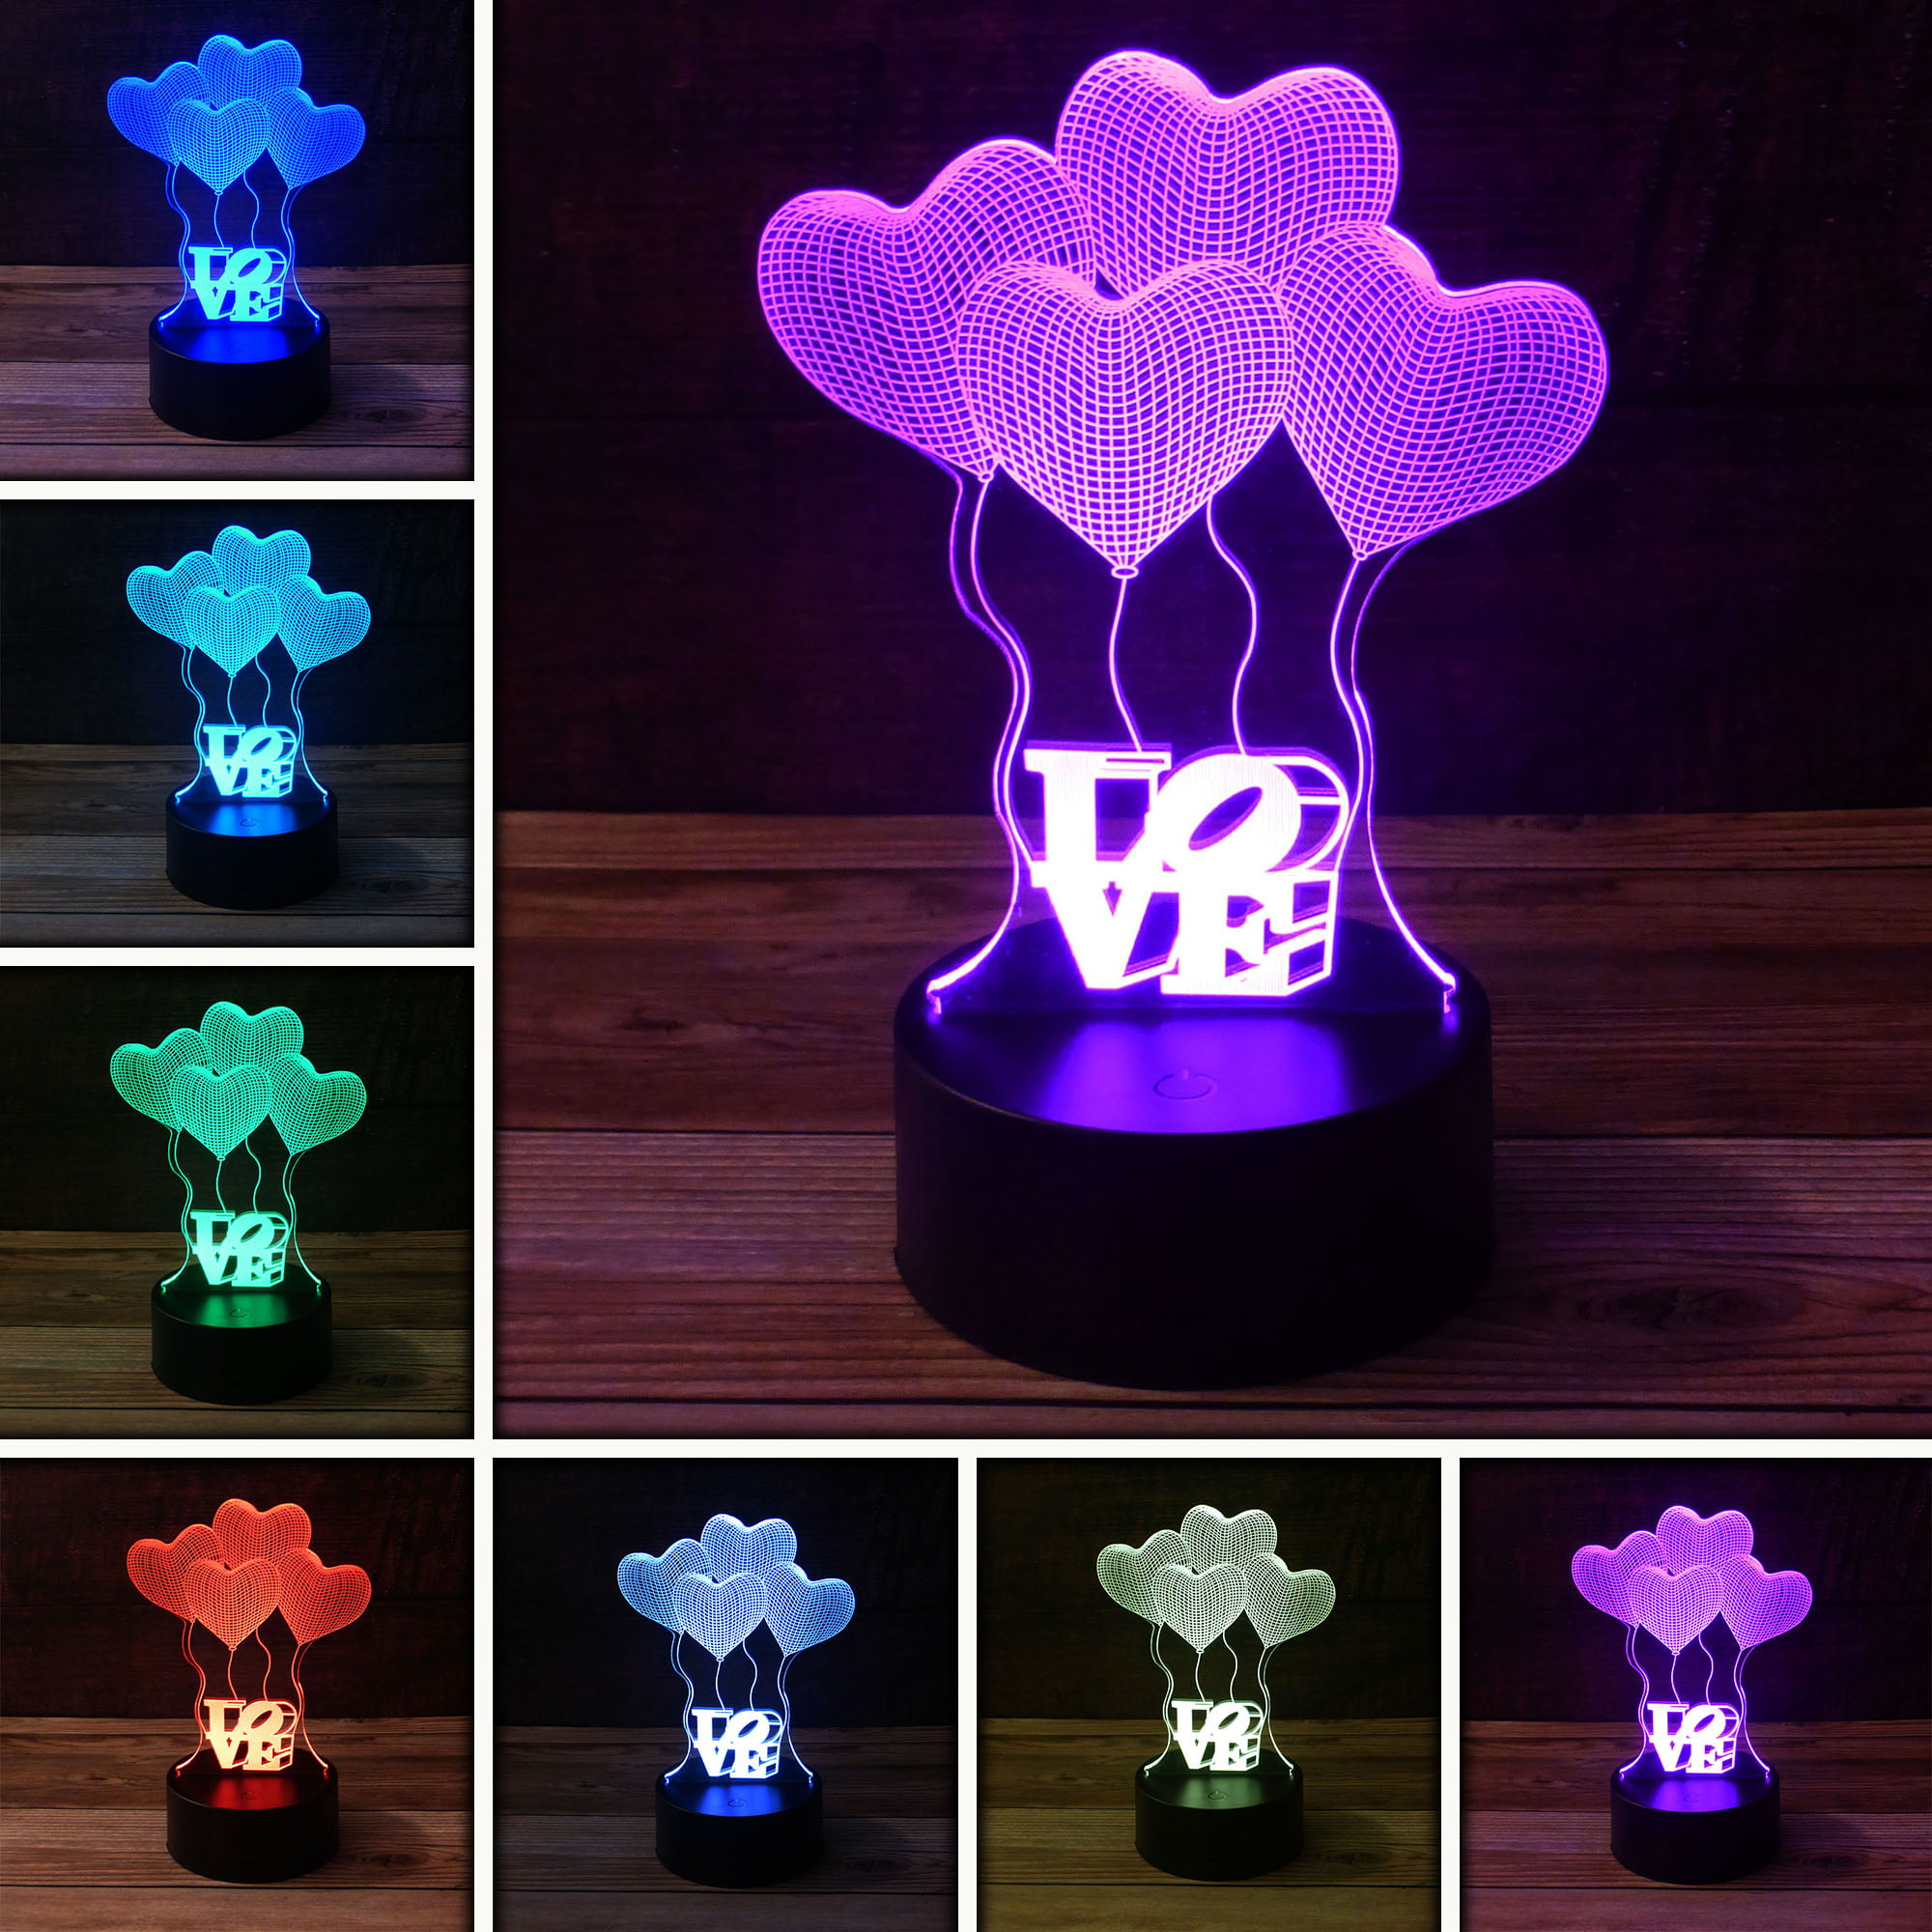 Kid Room Decor LED Night Light Multi-Color Illusion Fade Atmosphere Flash Change Table Lighting Touch Control Support USB AA Battery Skateboard 3D Lamp Lighting 